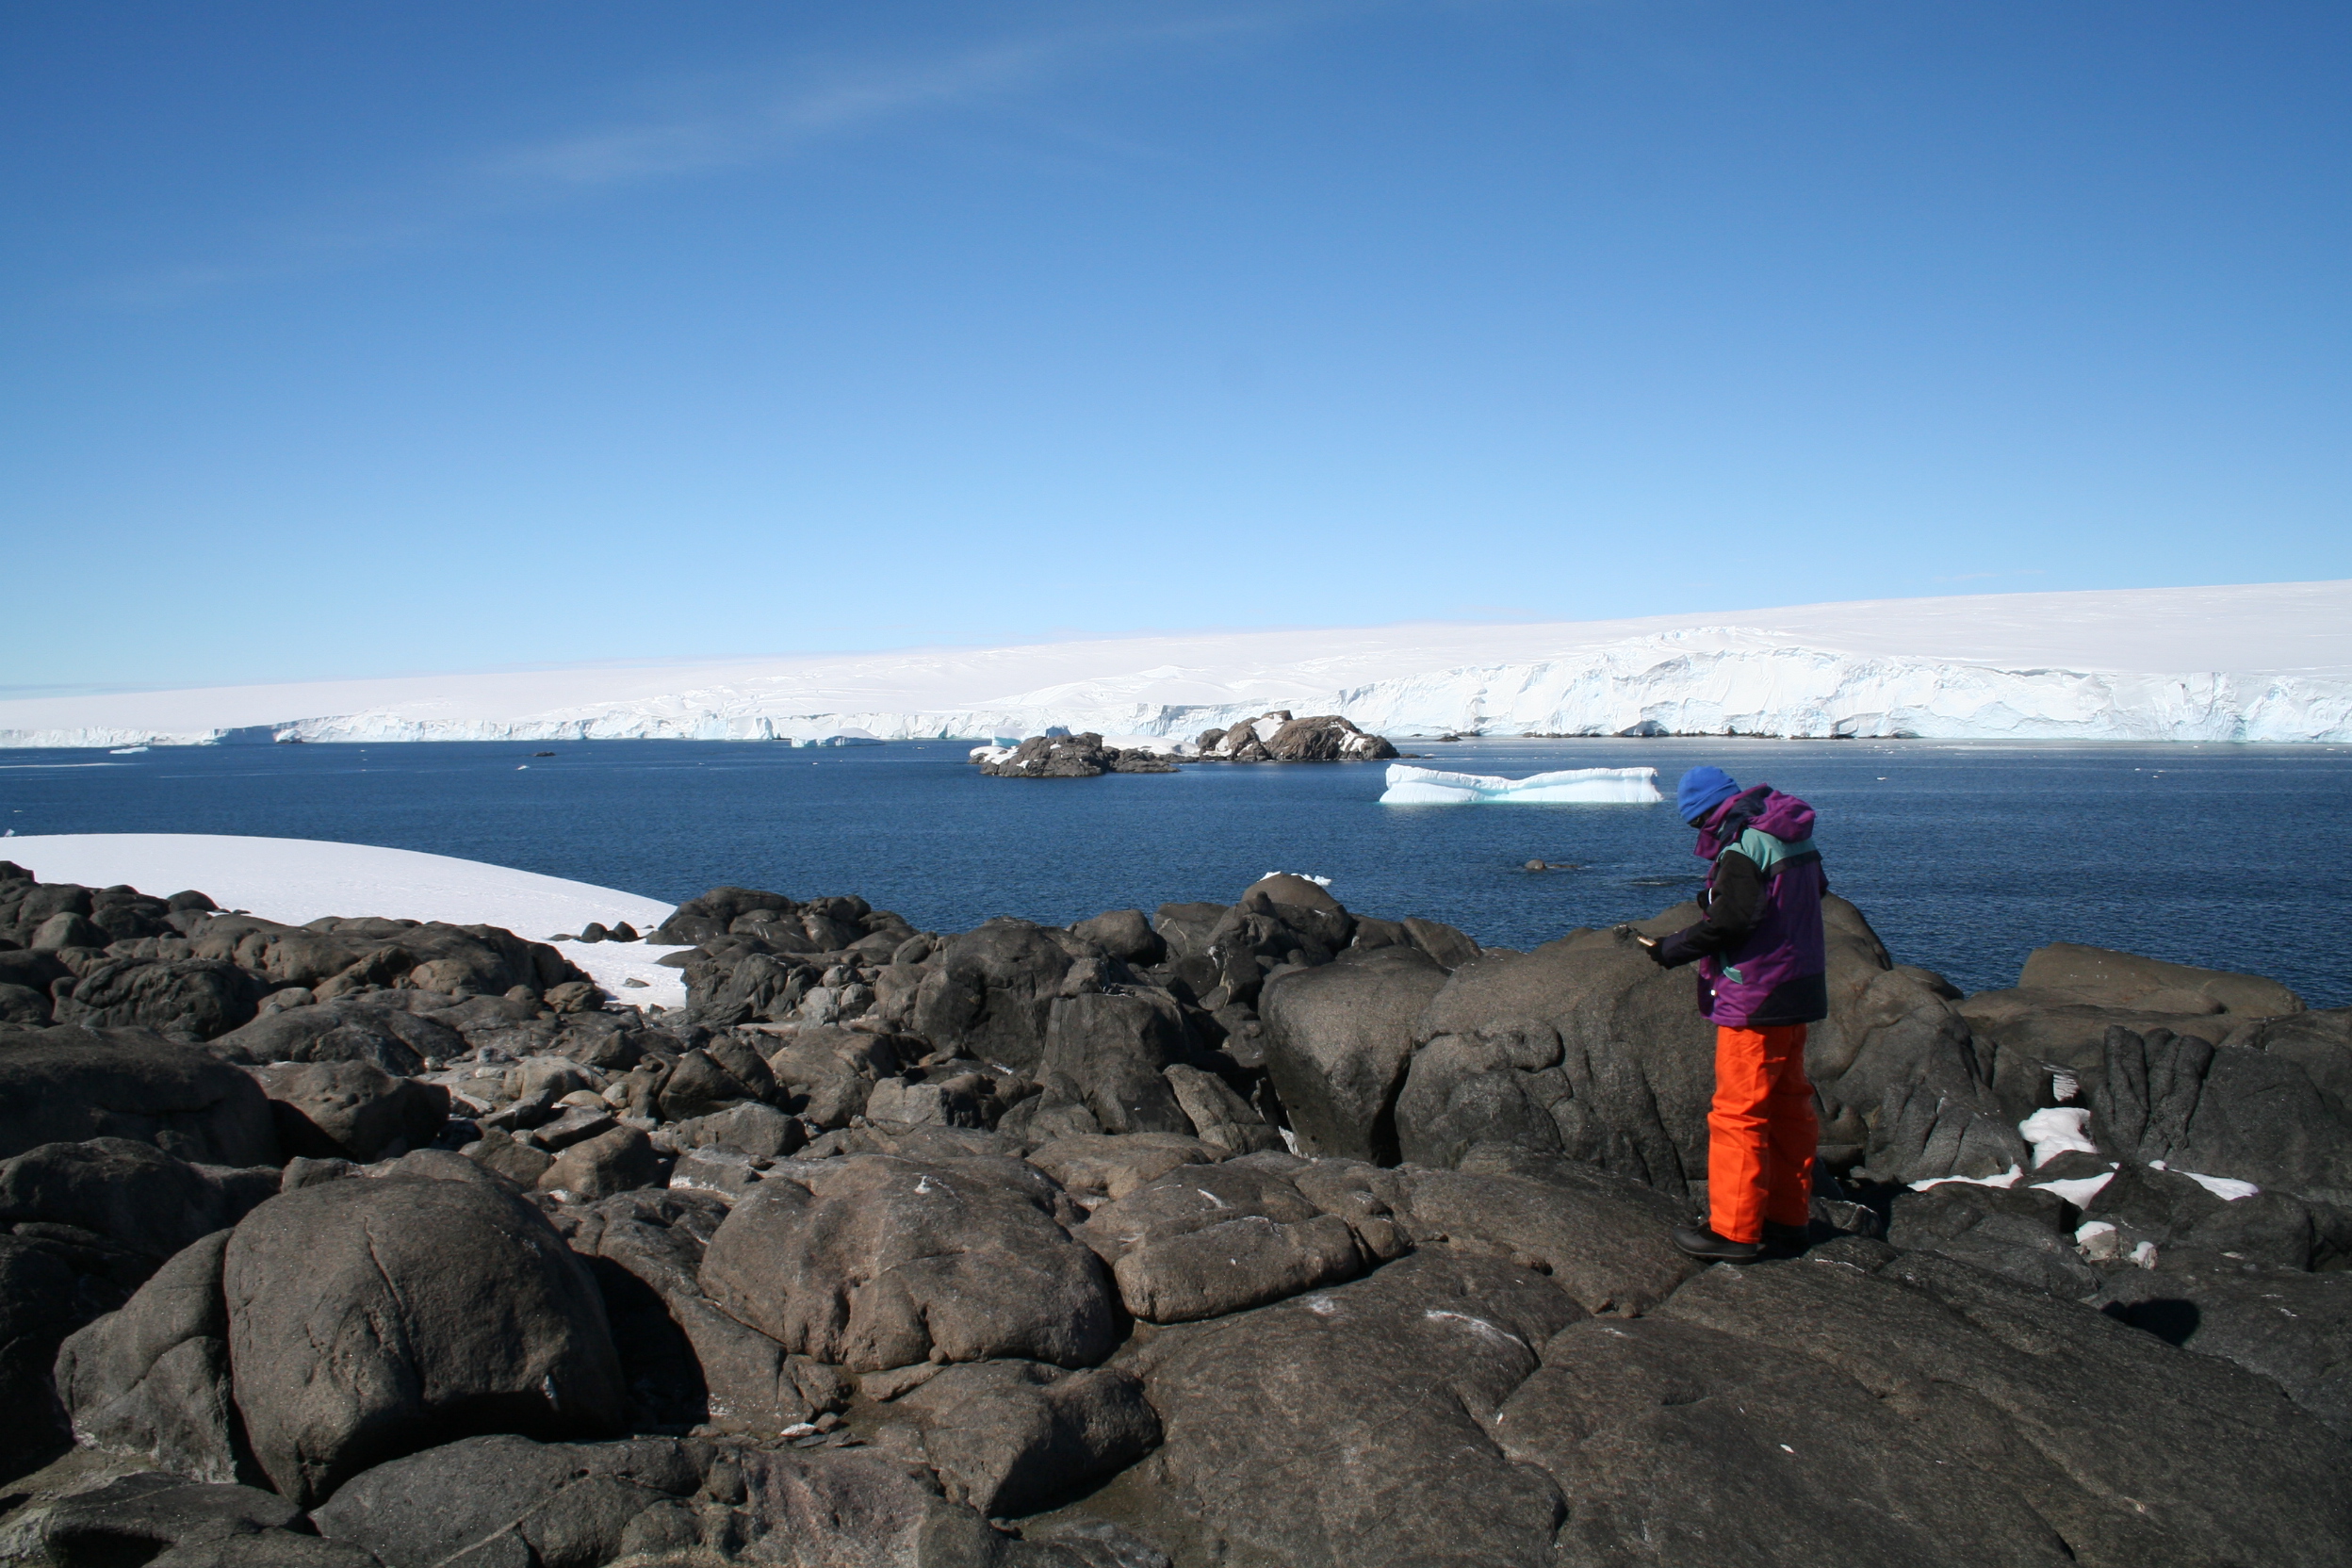 Image of geologist working on rocky island outcrops in Antarctica